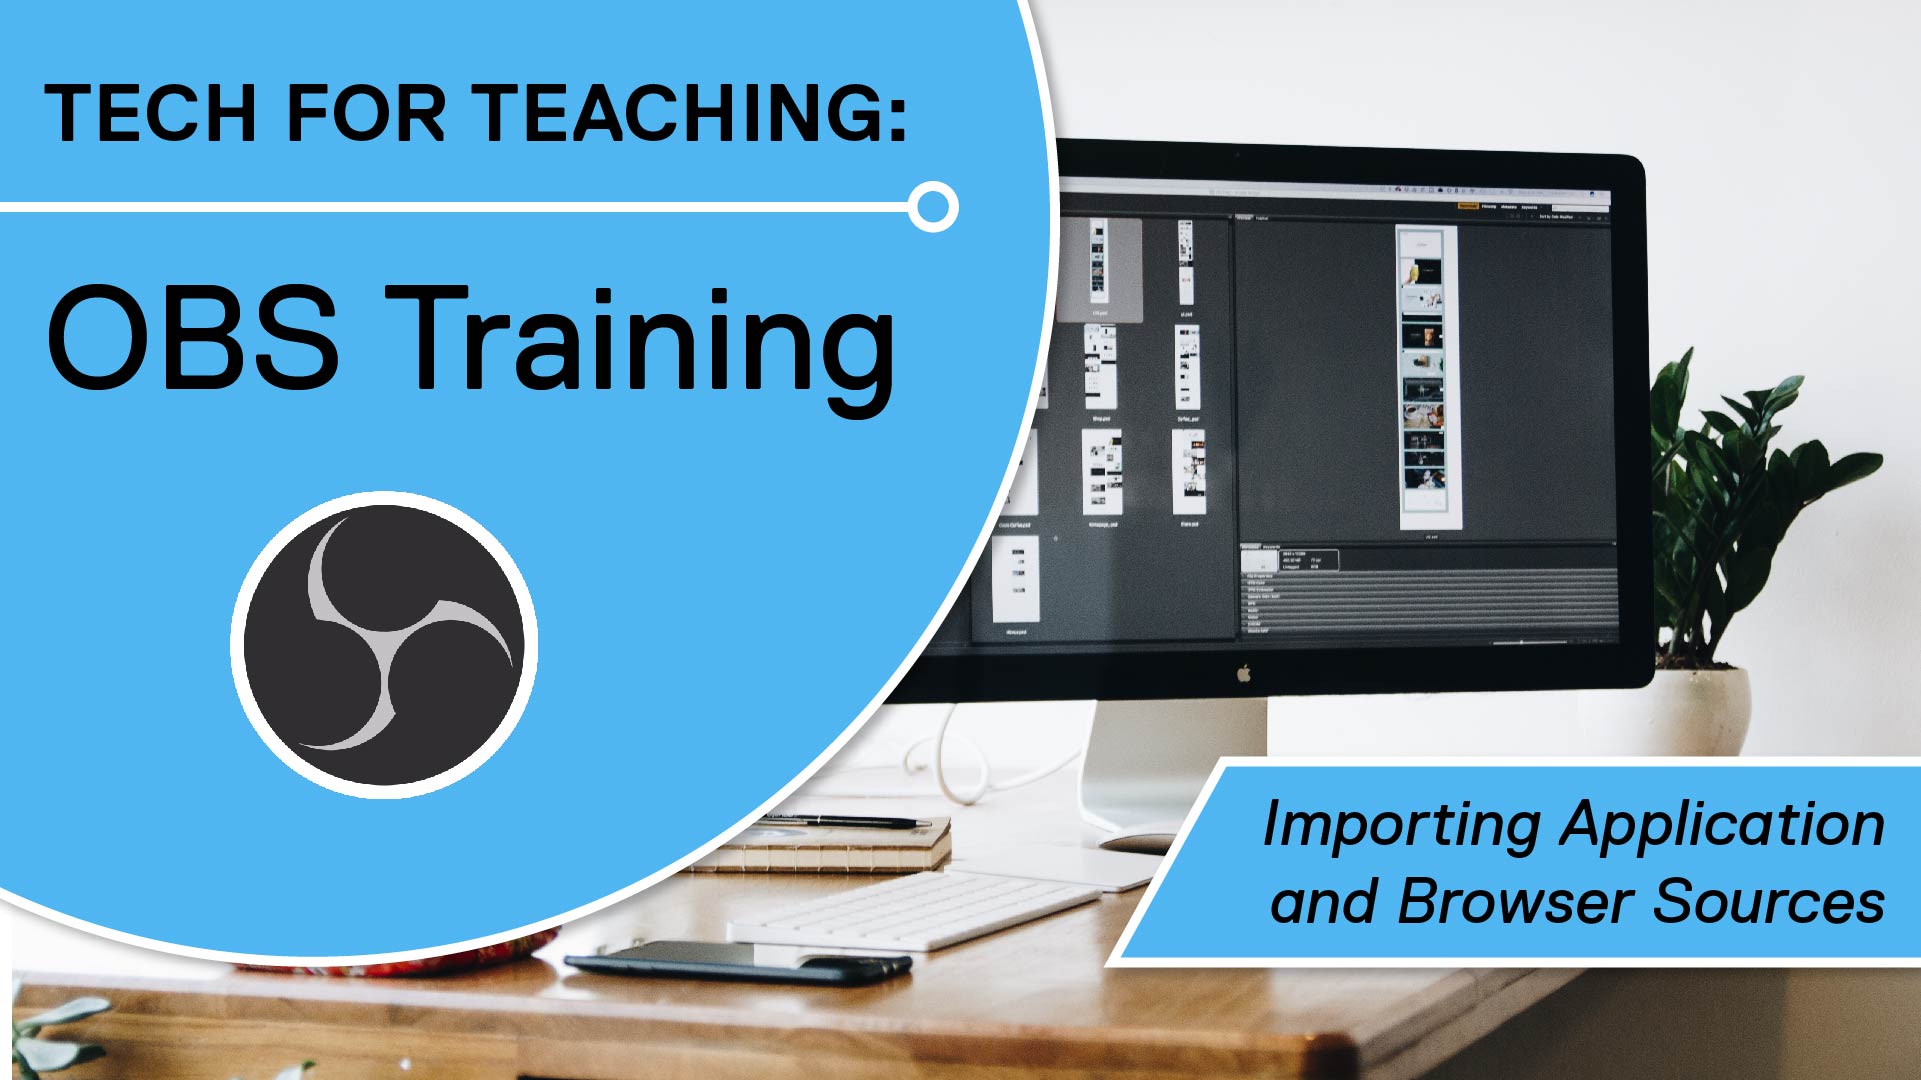 Tech for Teaching: OBS Training - Importing Application and Browser Sources